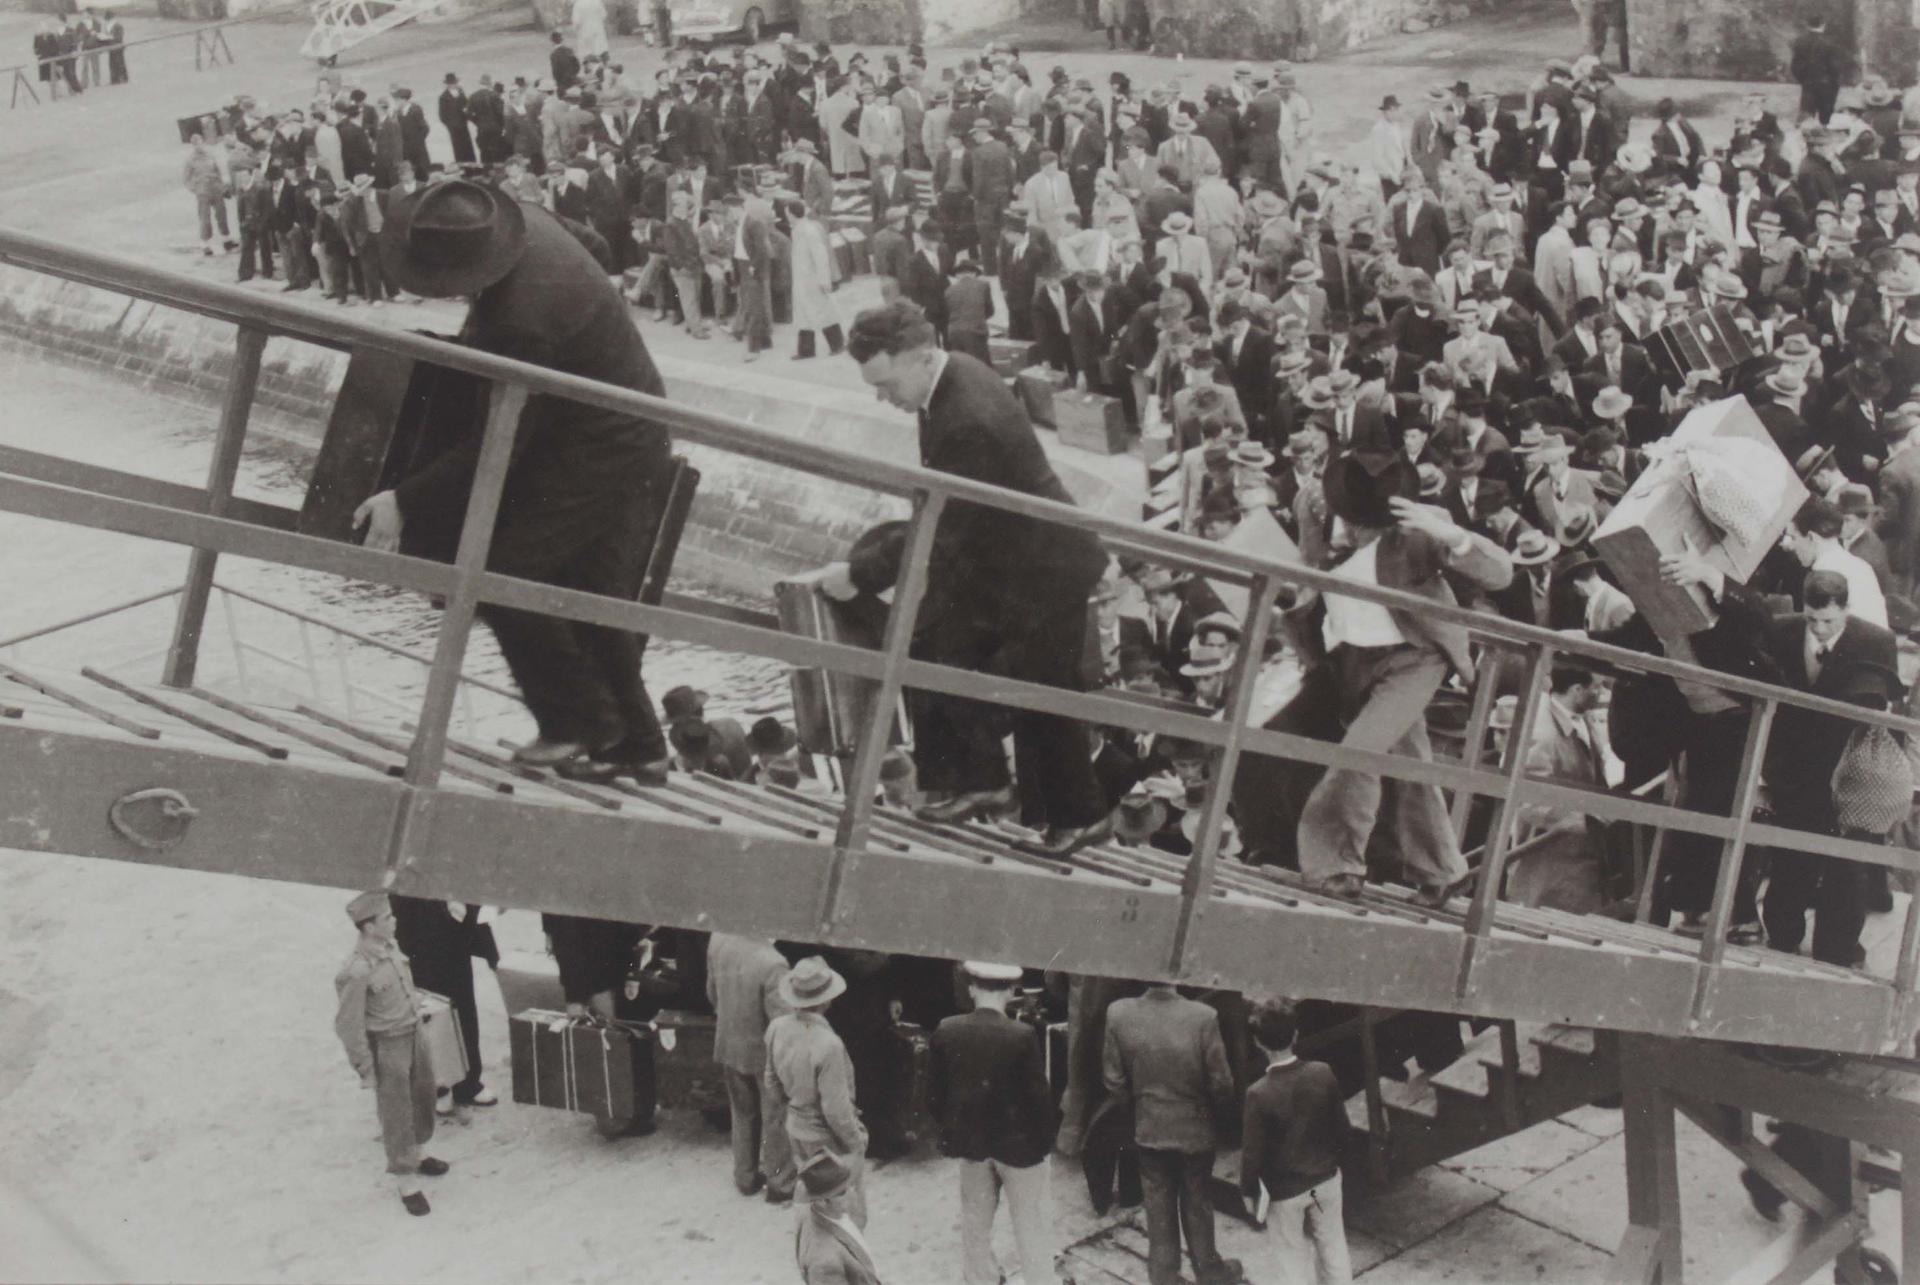 A black and white photo of men ascending to a ship, with others on the quay below